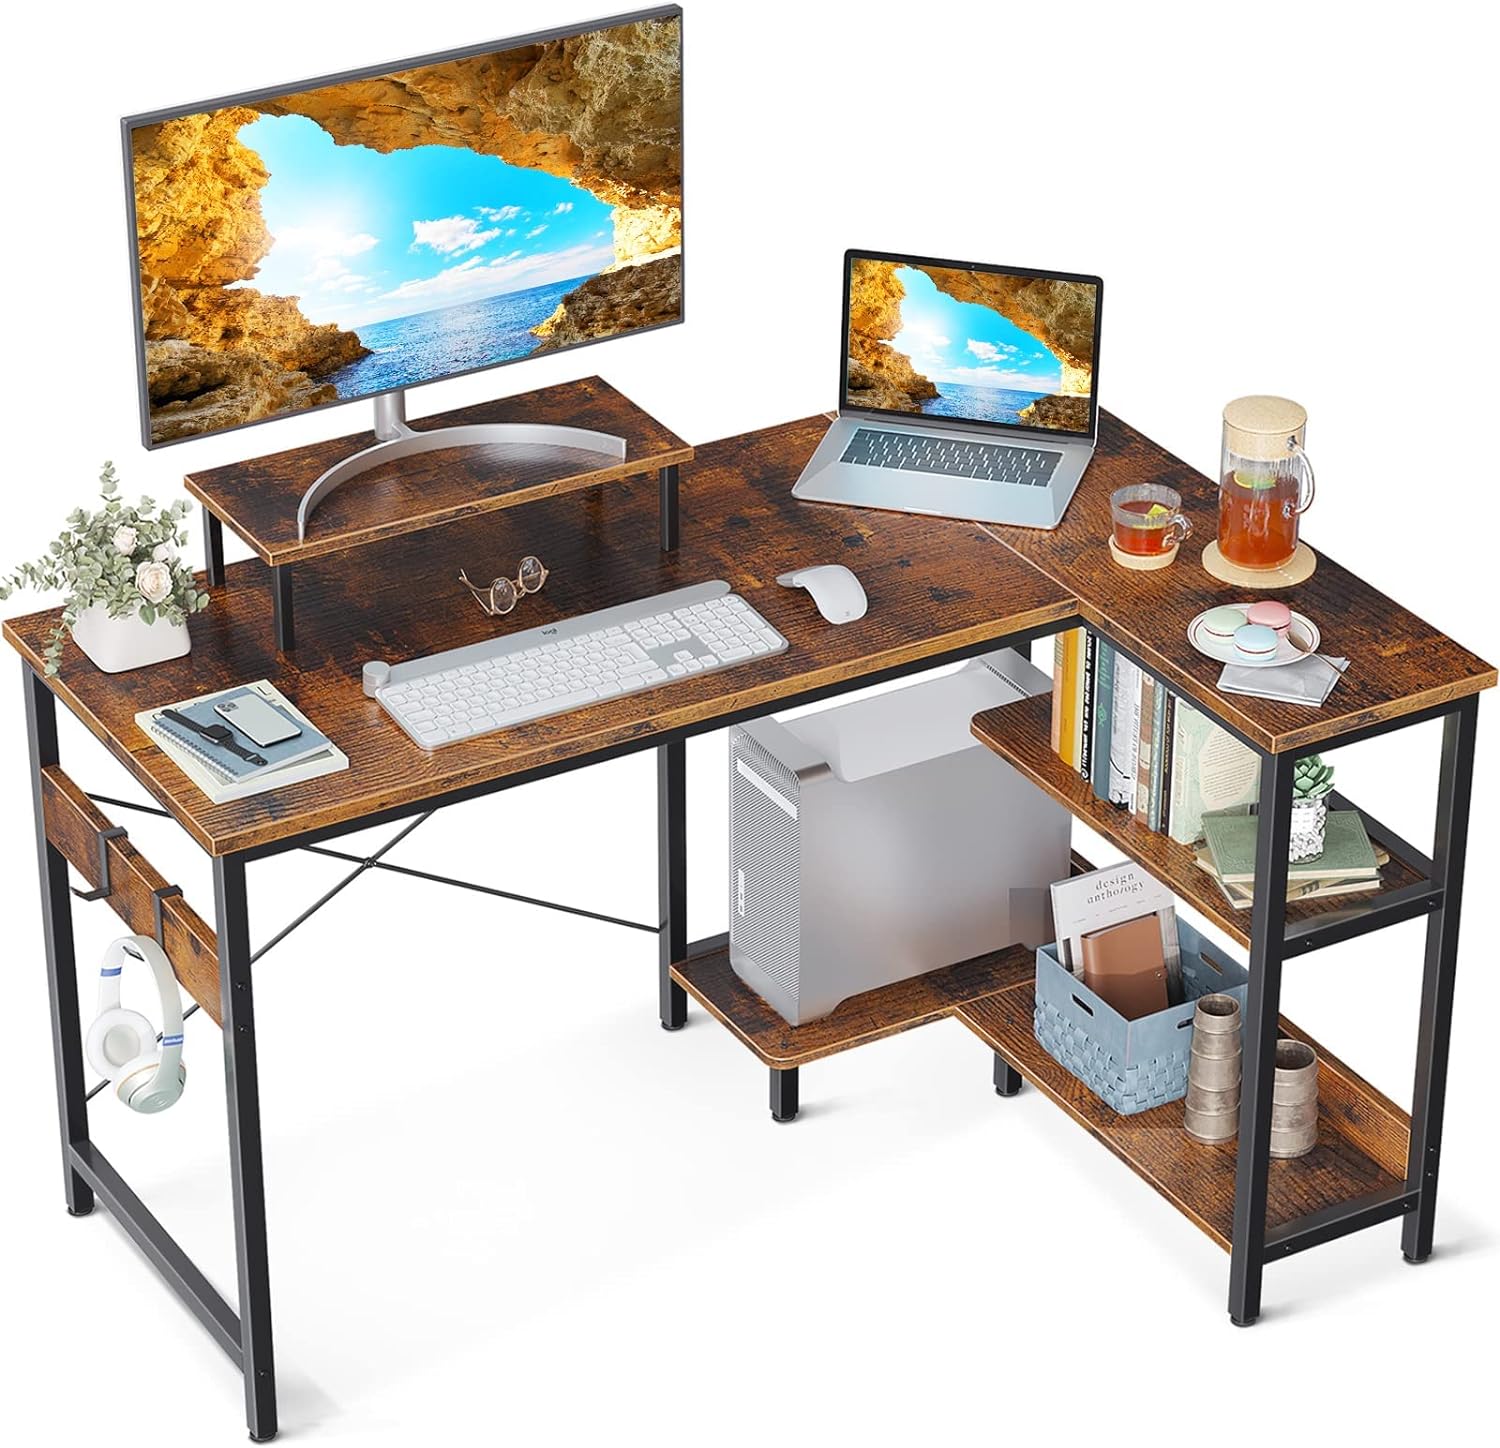 ODK L Shaped Computer Desk with Storage Shelves, 47 inch L-Shaped Corner Desk with Monitor Stand for Small Space, Modern Simple Writing Study Table for Home Office, Rustic Brown